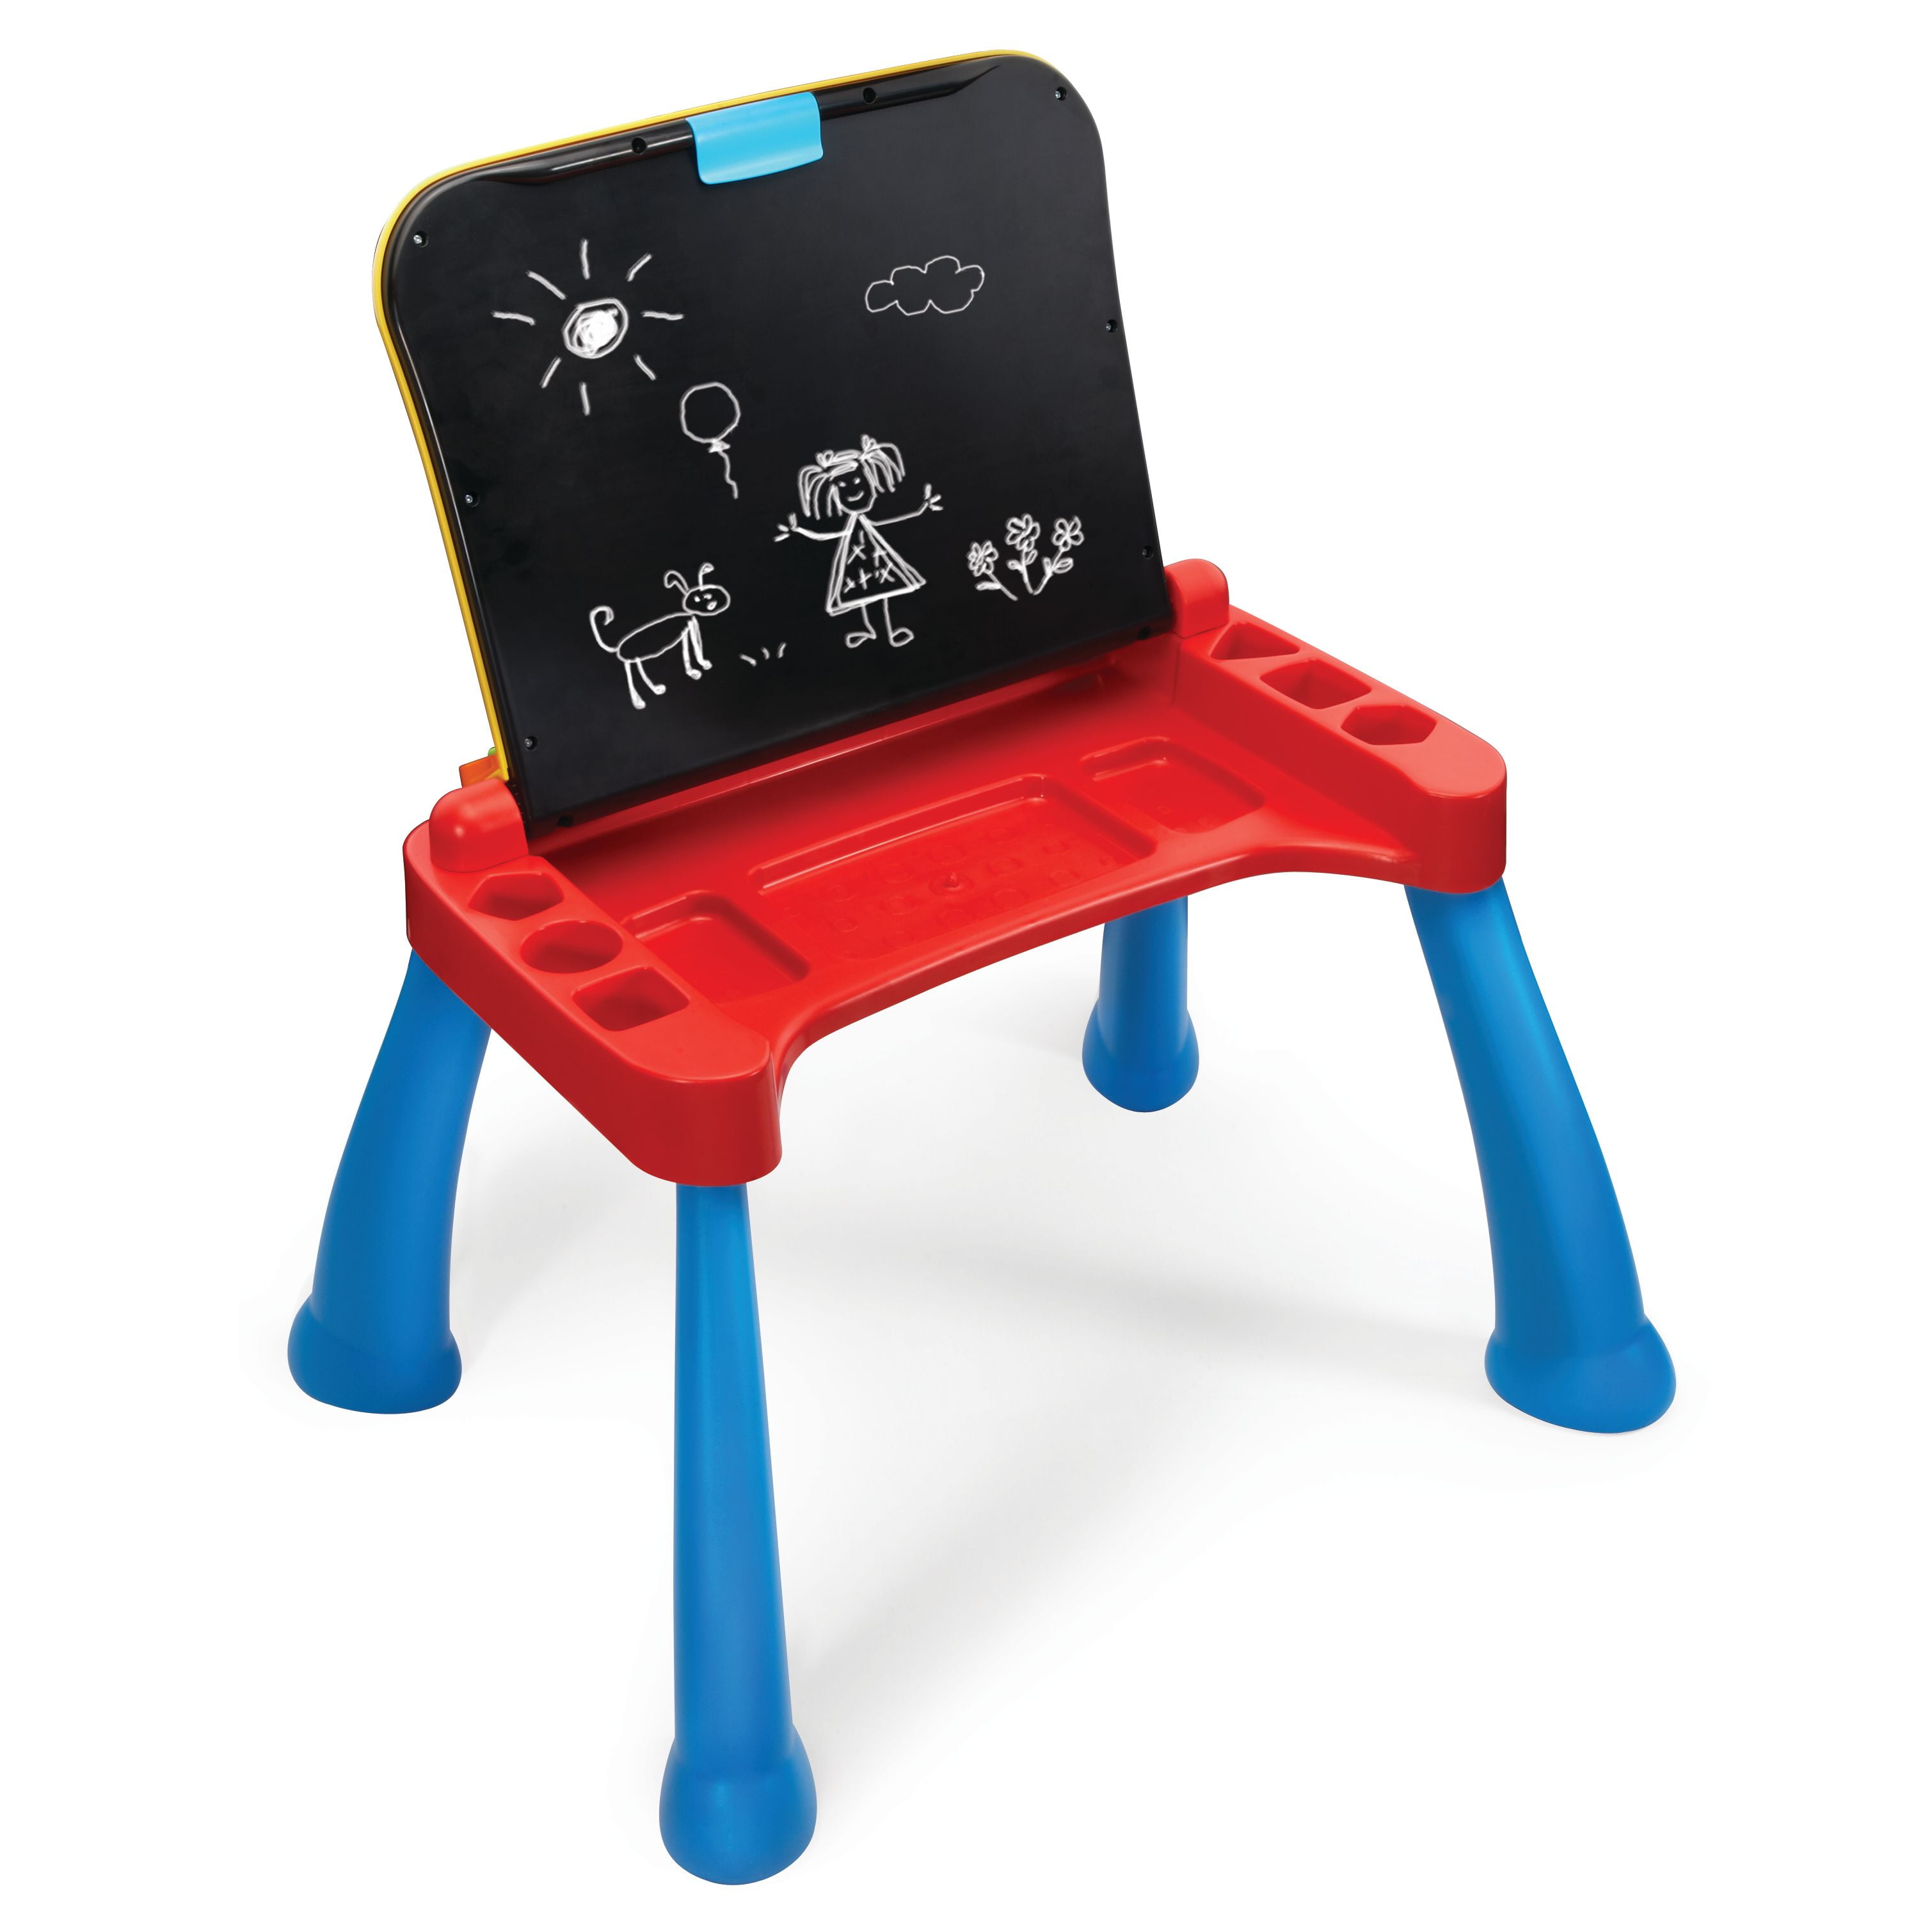 walmart touch and learn activity desk